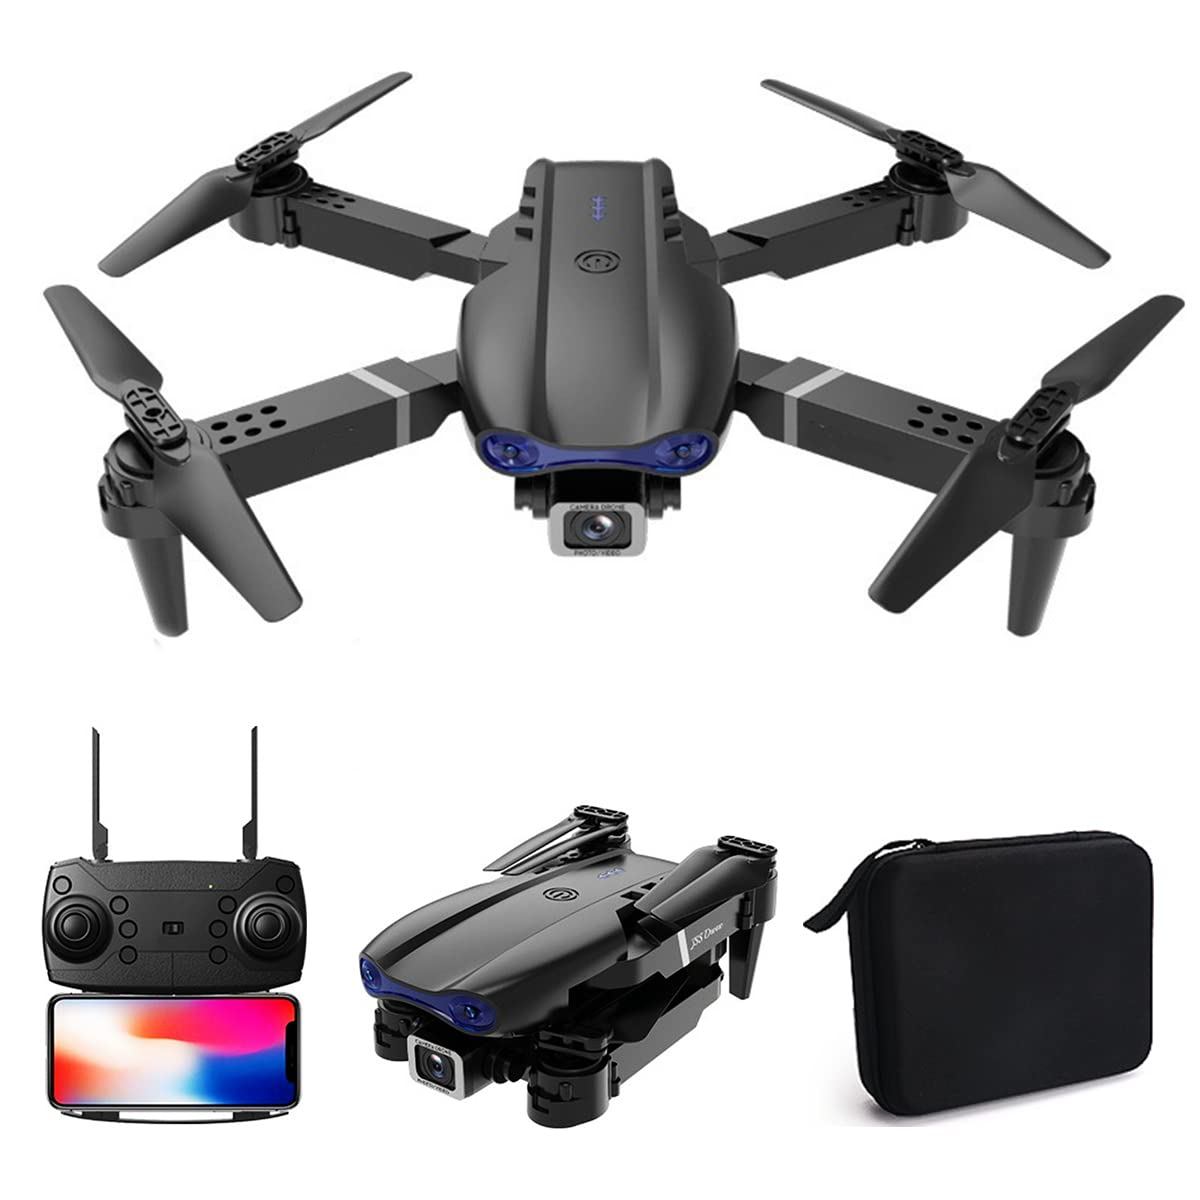 Drone with 1080P Dual HD Camera - 2022 Upgradded RC Quadcopter for Adults and Kids, WiFi FPV RC Drone for Beginners Live Video HD Wide Angle RC Aircraft, Trajectory Flight, Auto Hover, Carrying Case